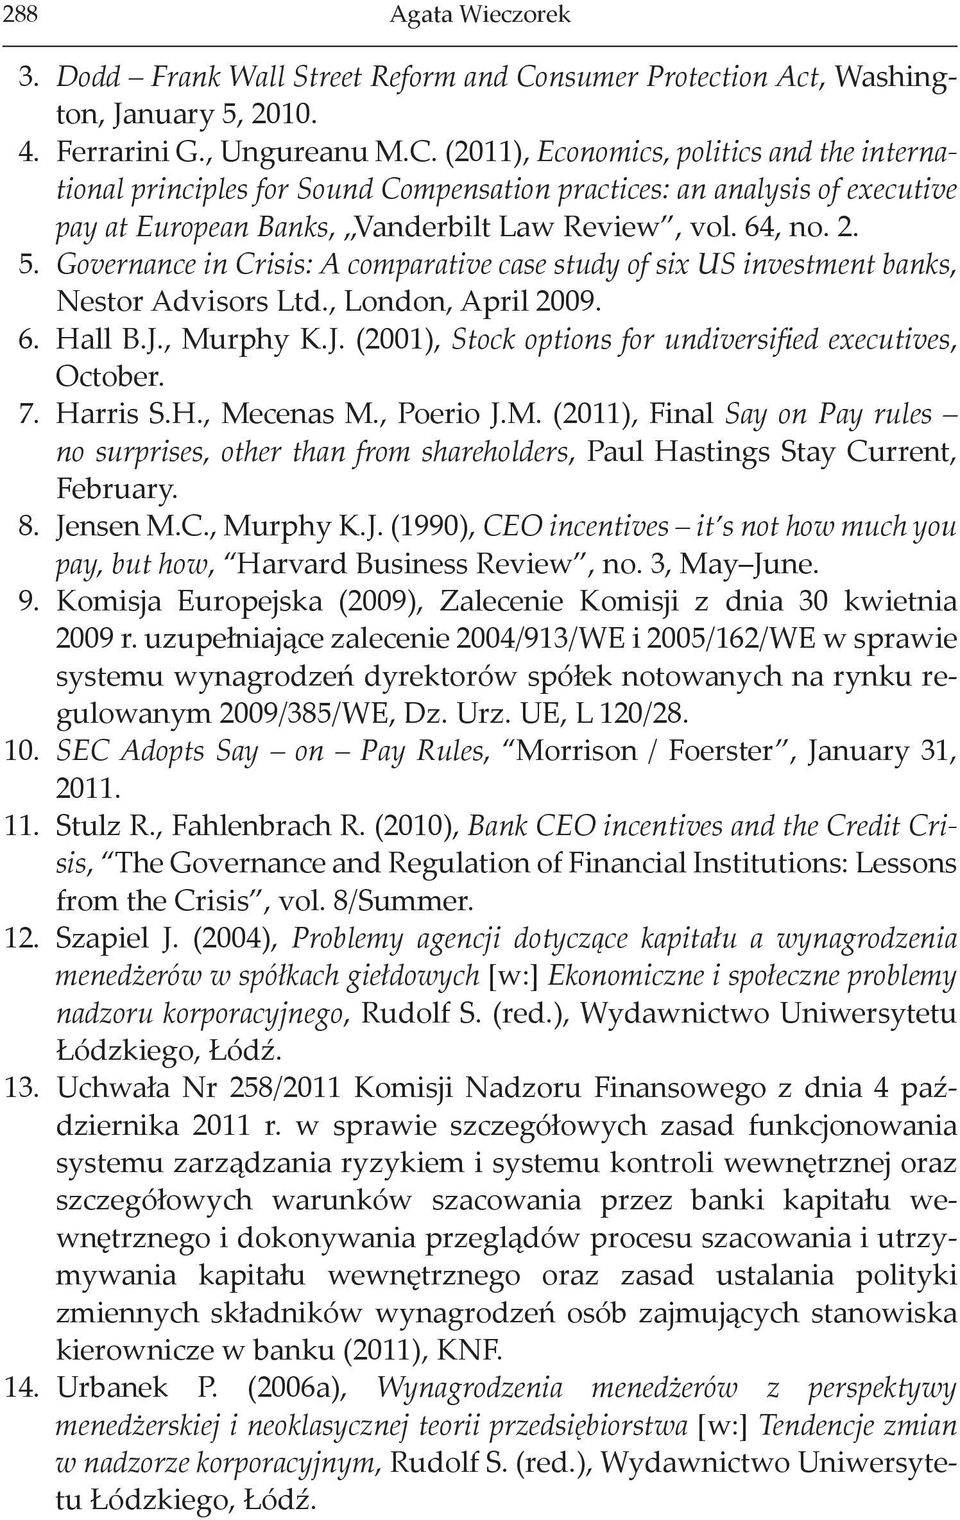 (2011), Economics, politics and the international principles for Sound Compensation practices: an analysis of executive pay at European Banks, Vanderbilt Law Review, vol. 64, no. 2. 5.